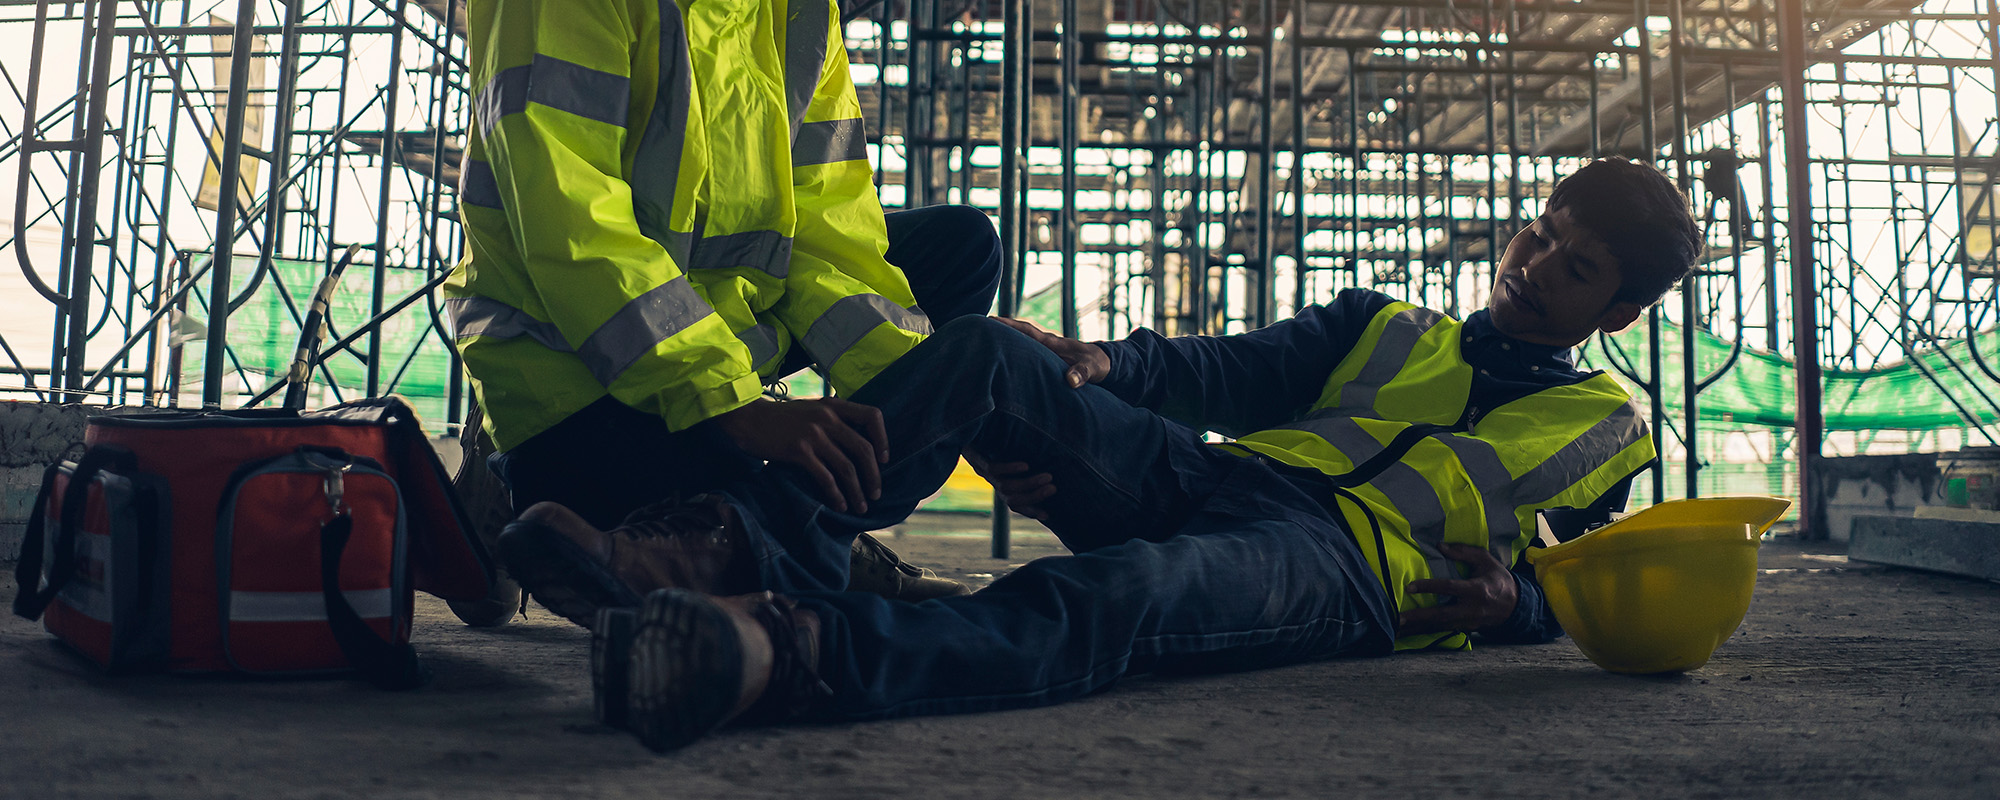 construction worker accident accidents at work builder accident fall scaffolding to the floor safety team help employww accident basic first aid training for support accident in site work